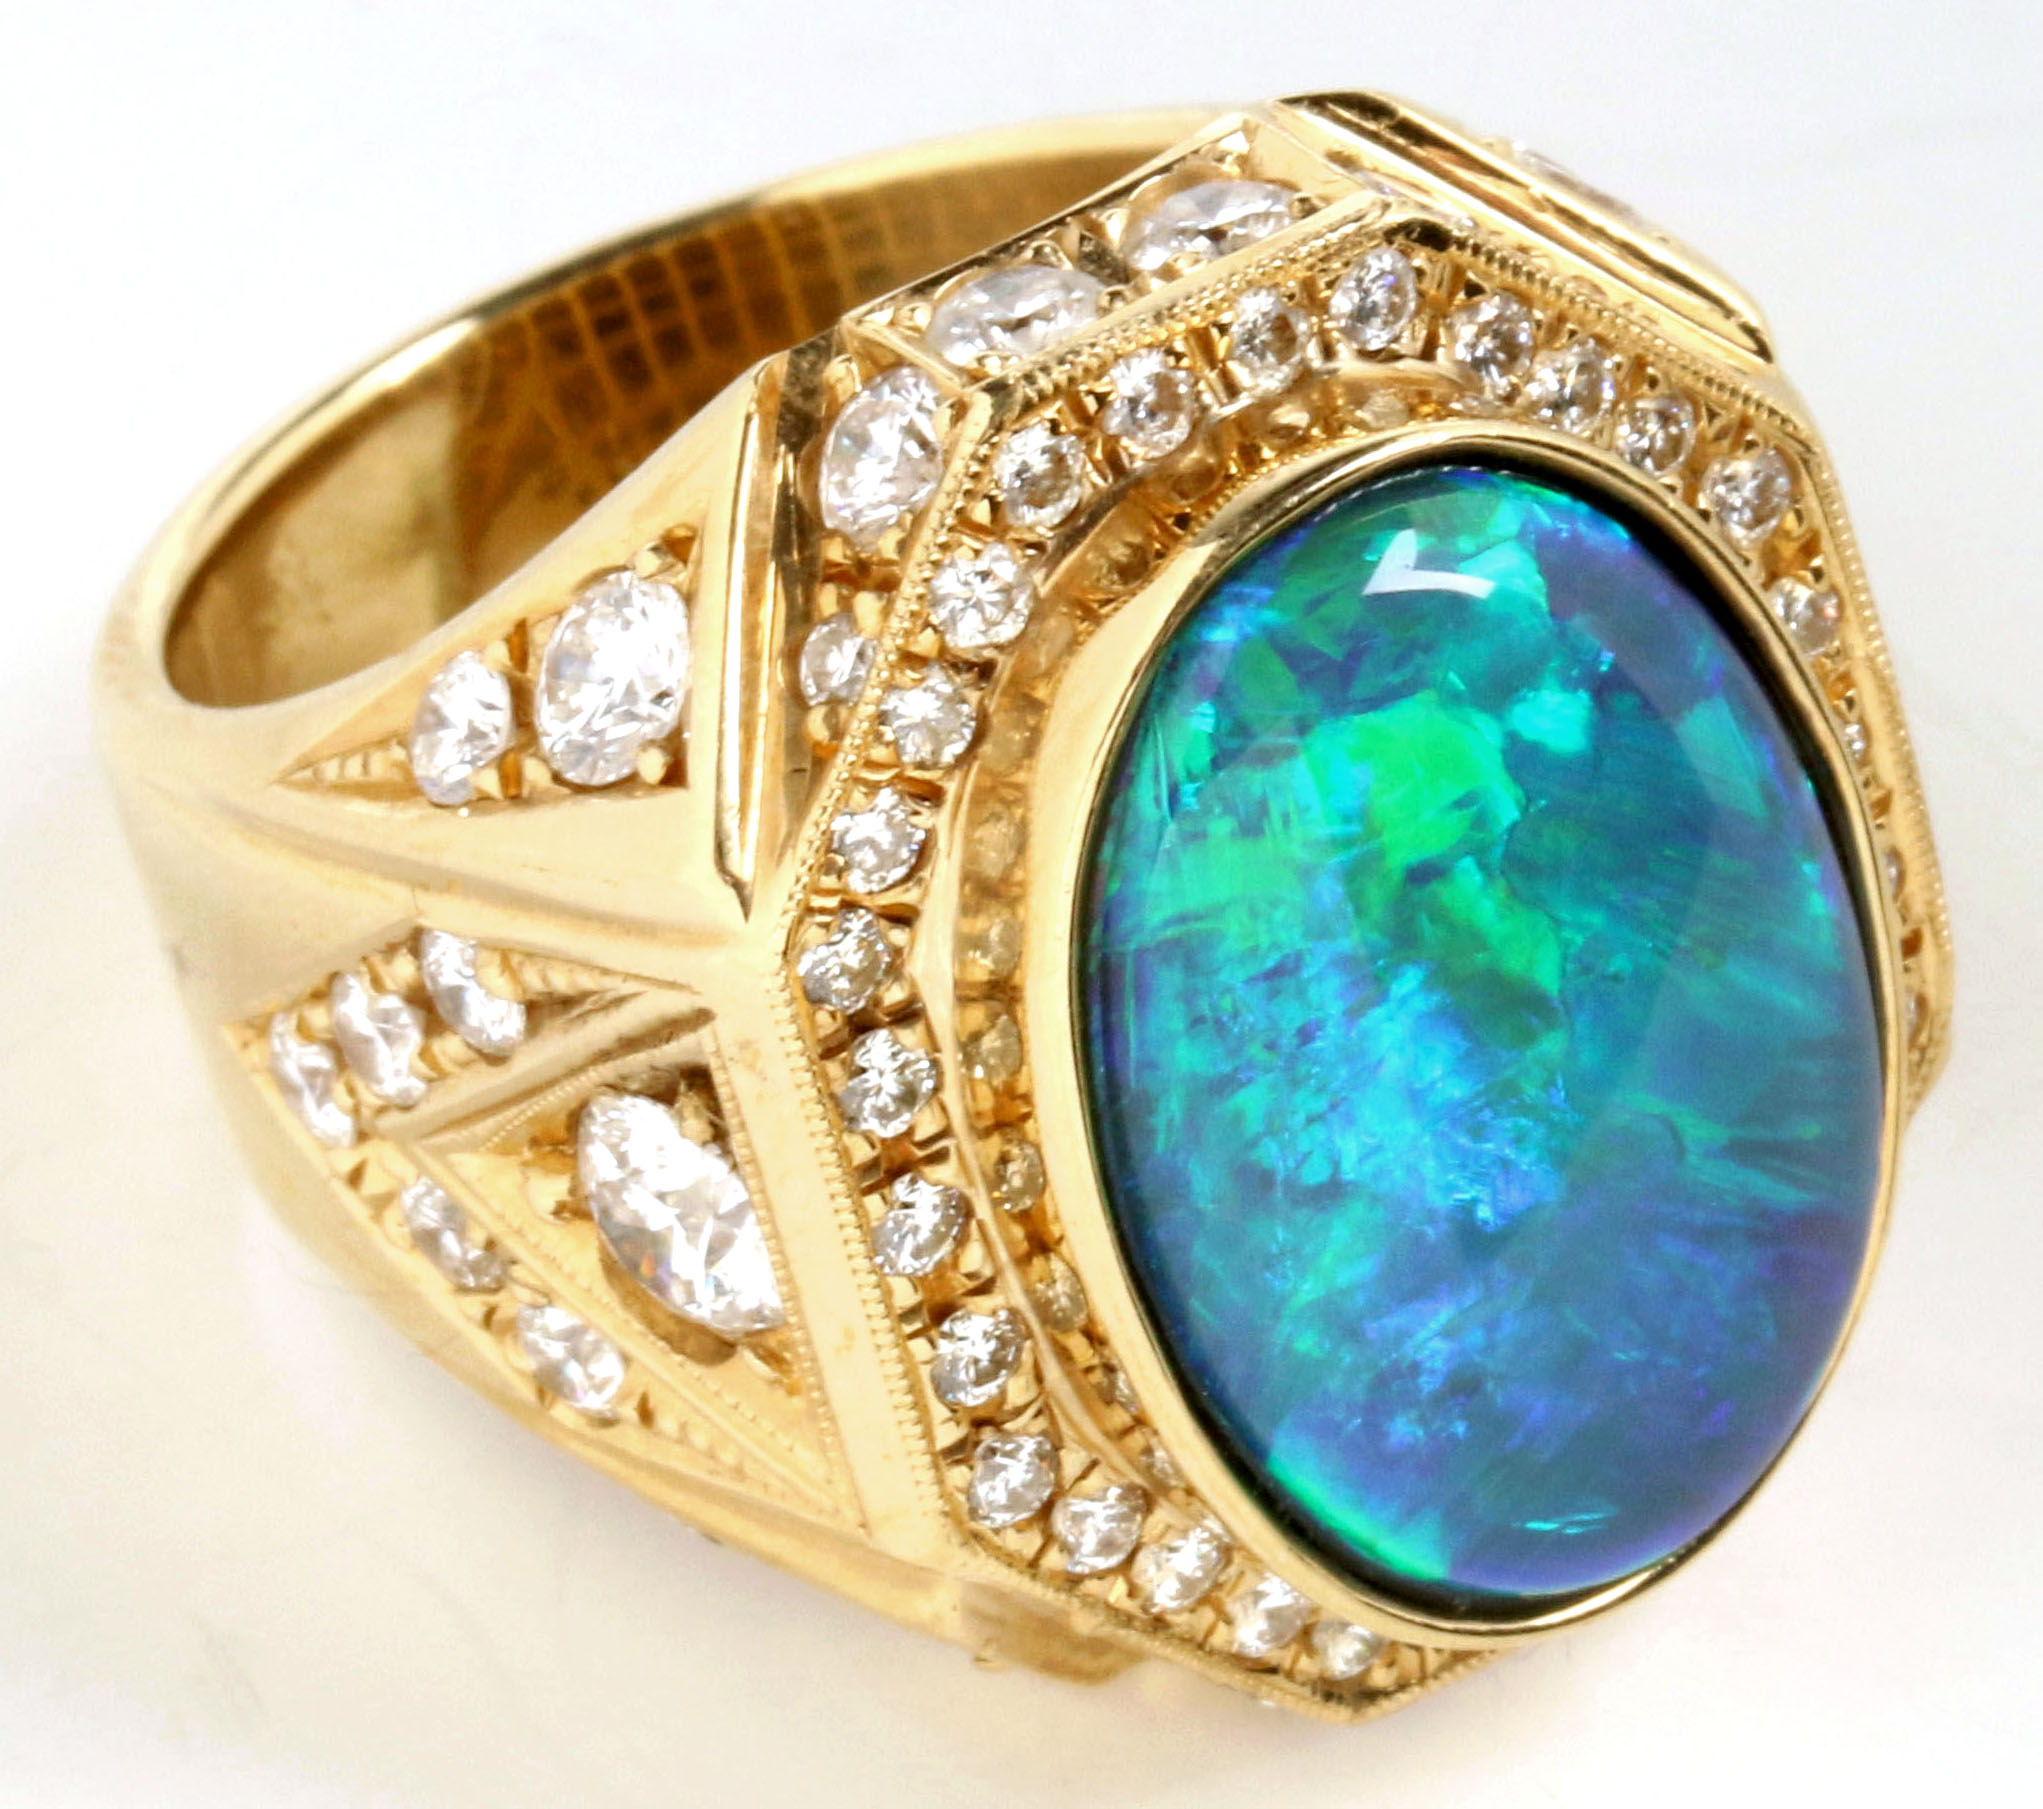 A GENT'S 18K GOLD BOULDER OPAL RING WITH DIAMONDS